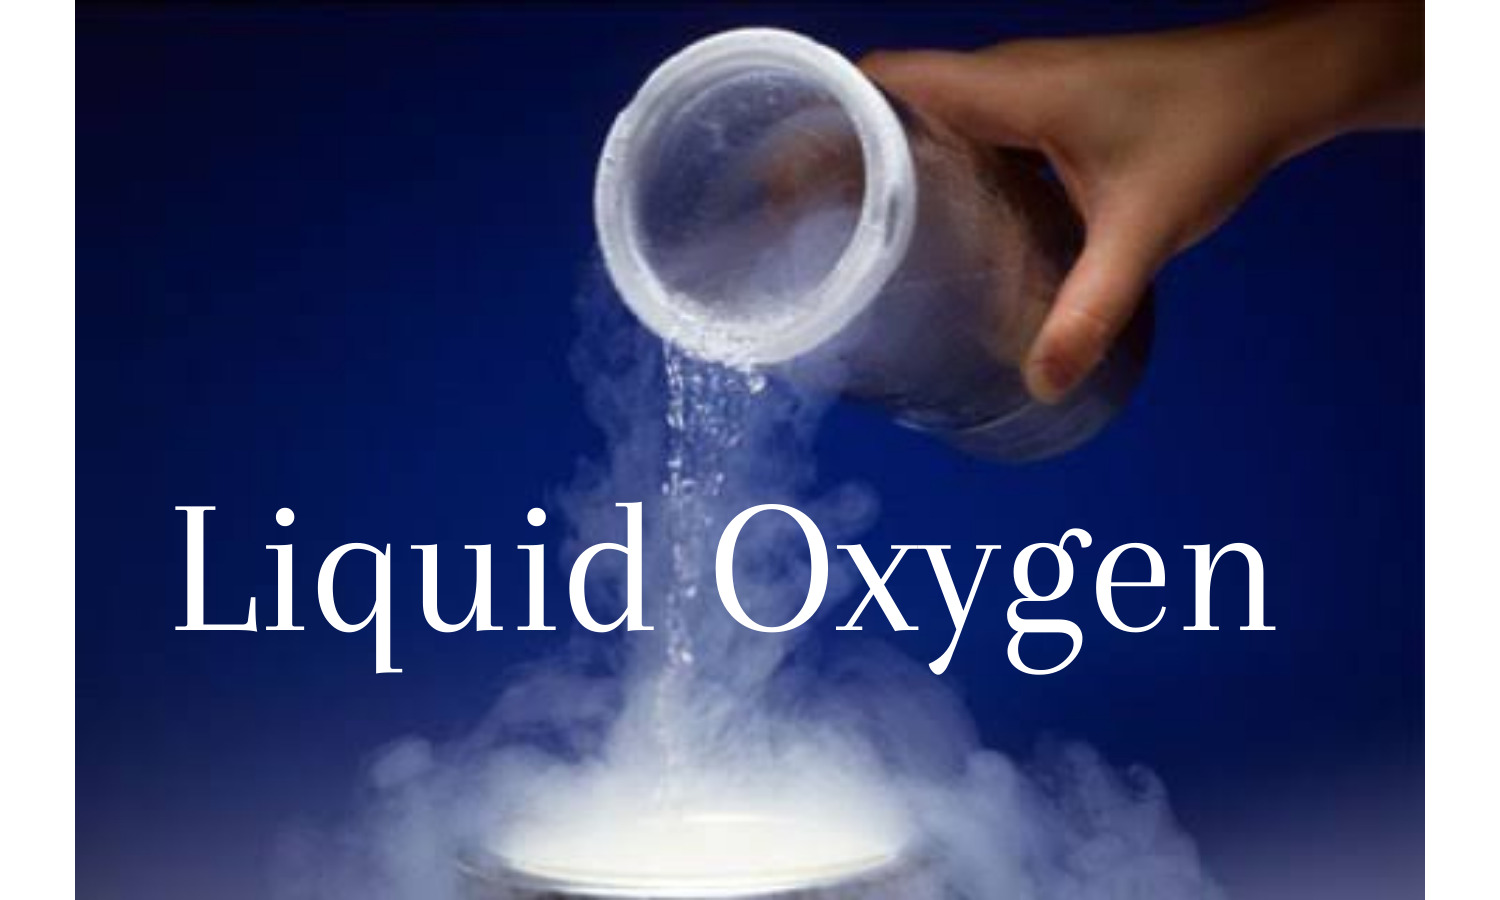 Explained: What is liquid oxygen and how is it produced